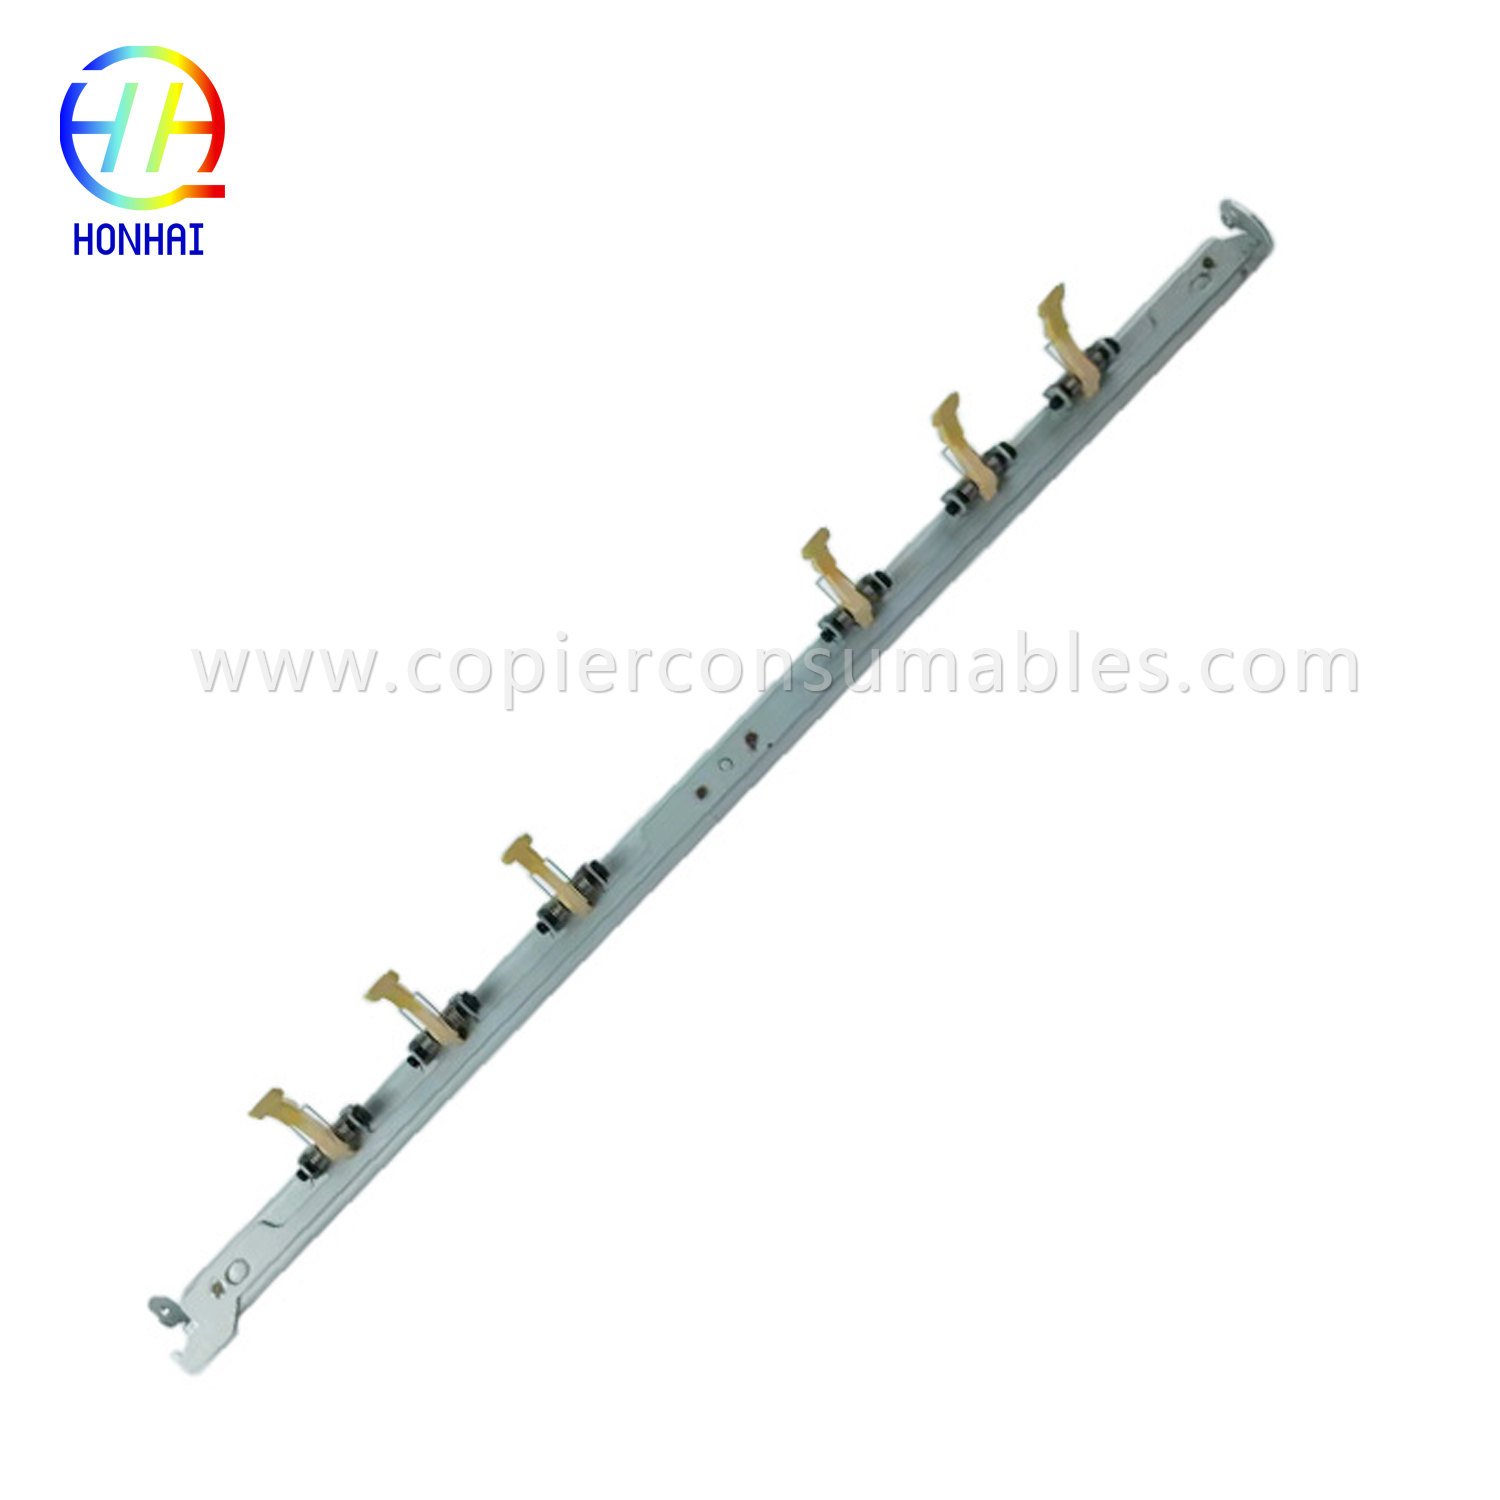 RAPINA Finger for Superioris fuser RAPINA Finger & Separate Claws High Quality & Long Life for Xerox 4110 019K98743 (2)